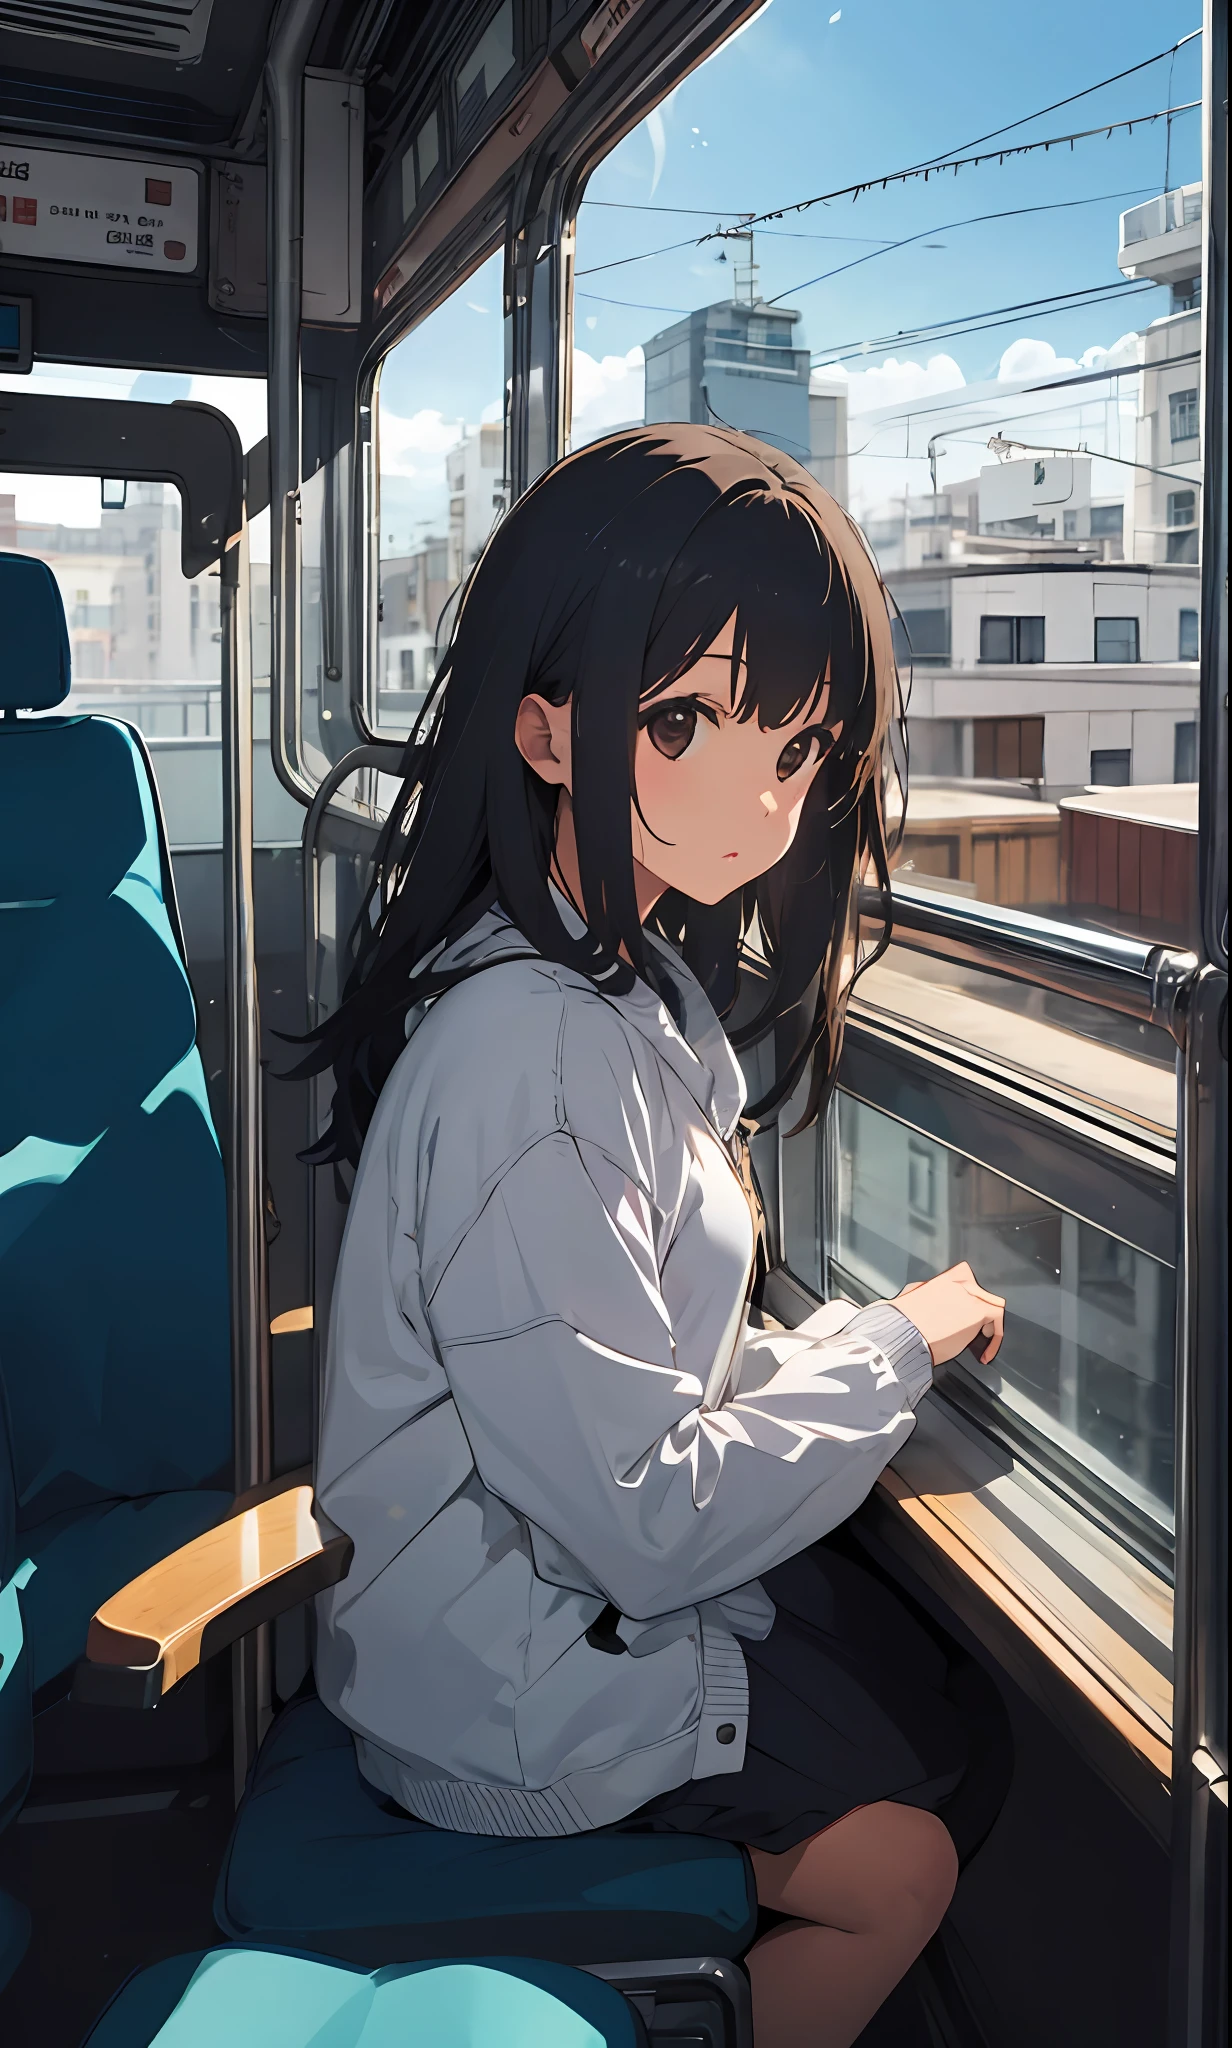 One girl, looking out at the scenery from inside the bus